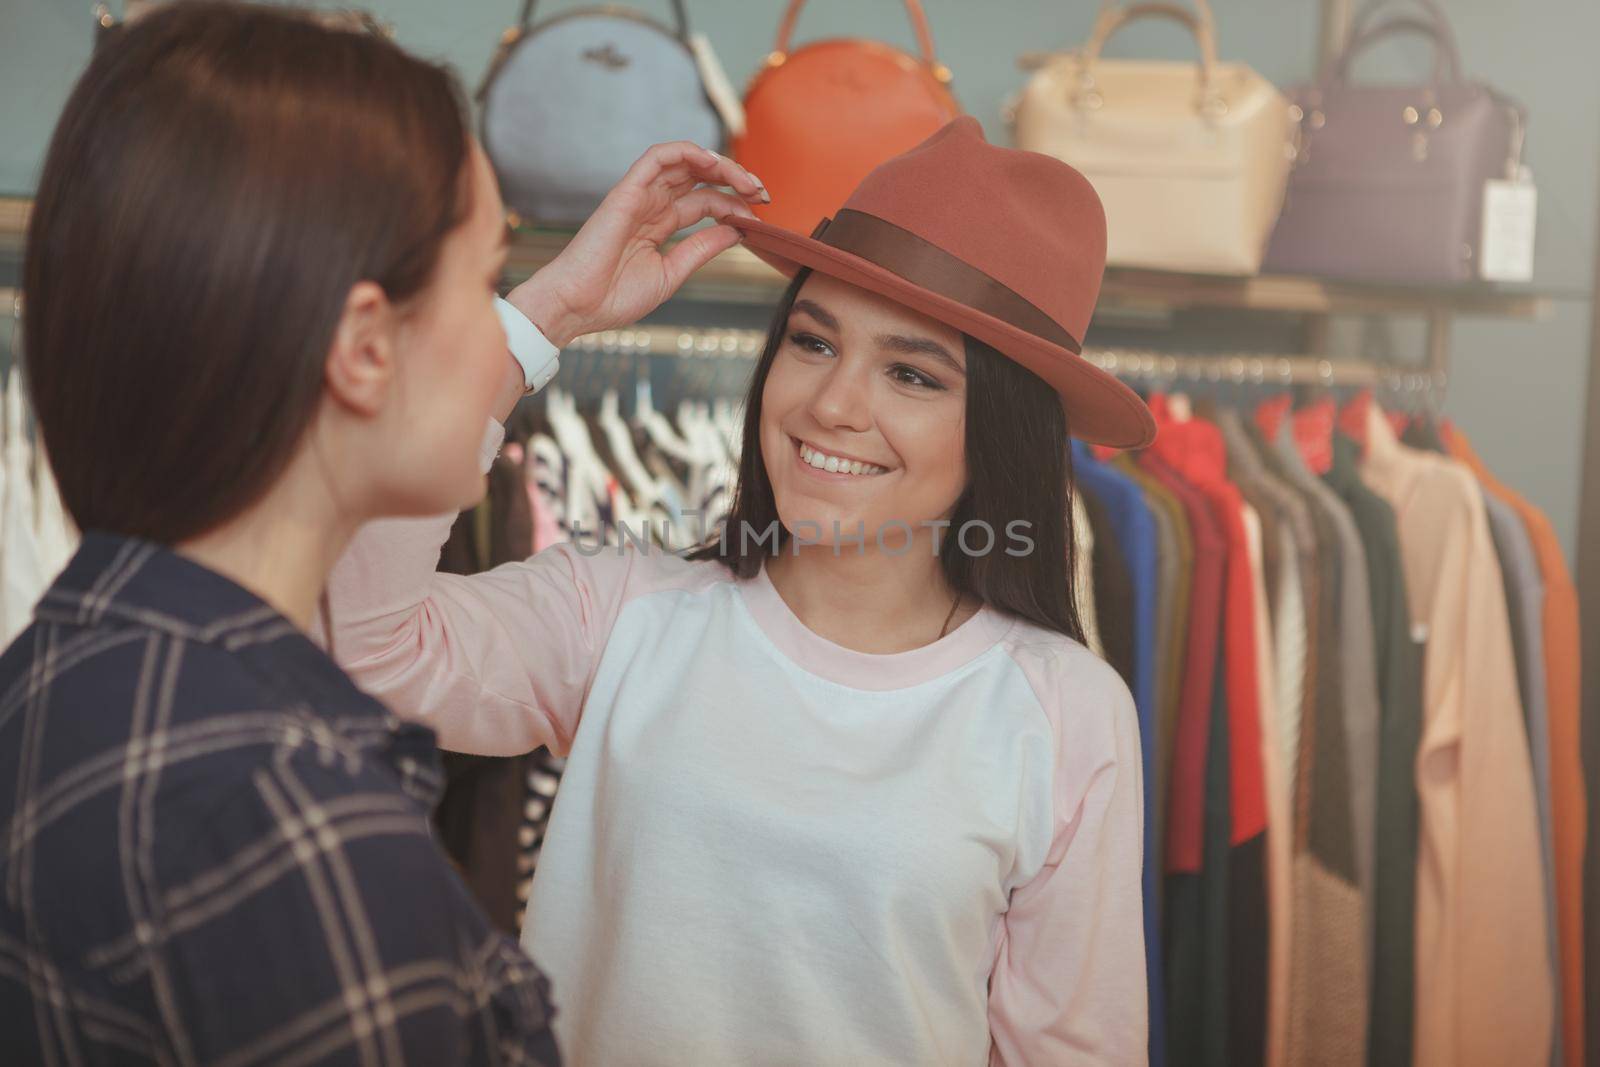 Beautiful cheerful young woman trying on a hat at clothing store, talking to her friend, copy space. Two young women enjoying shopping for clothing and accessories together